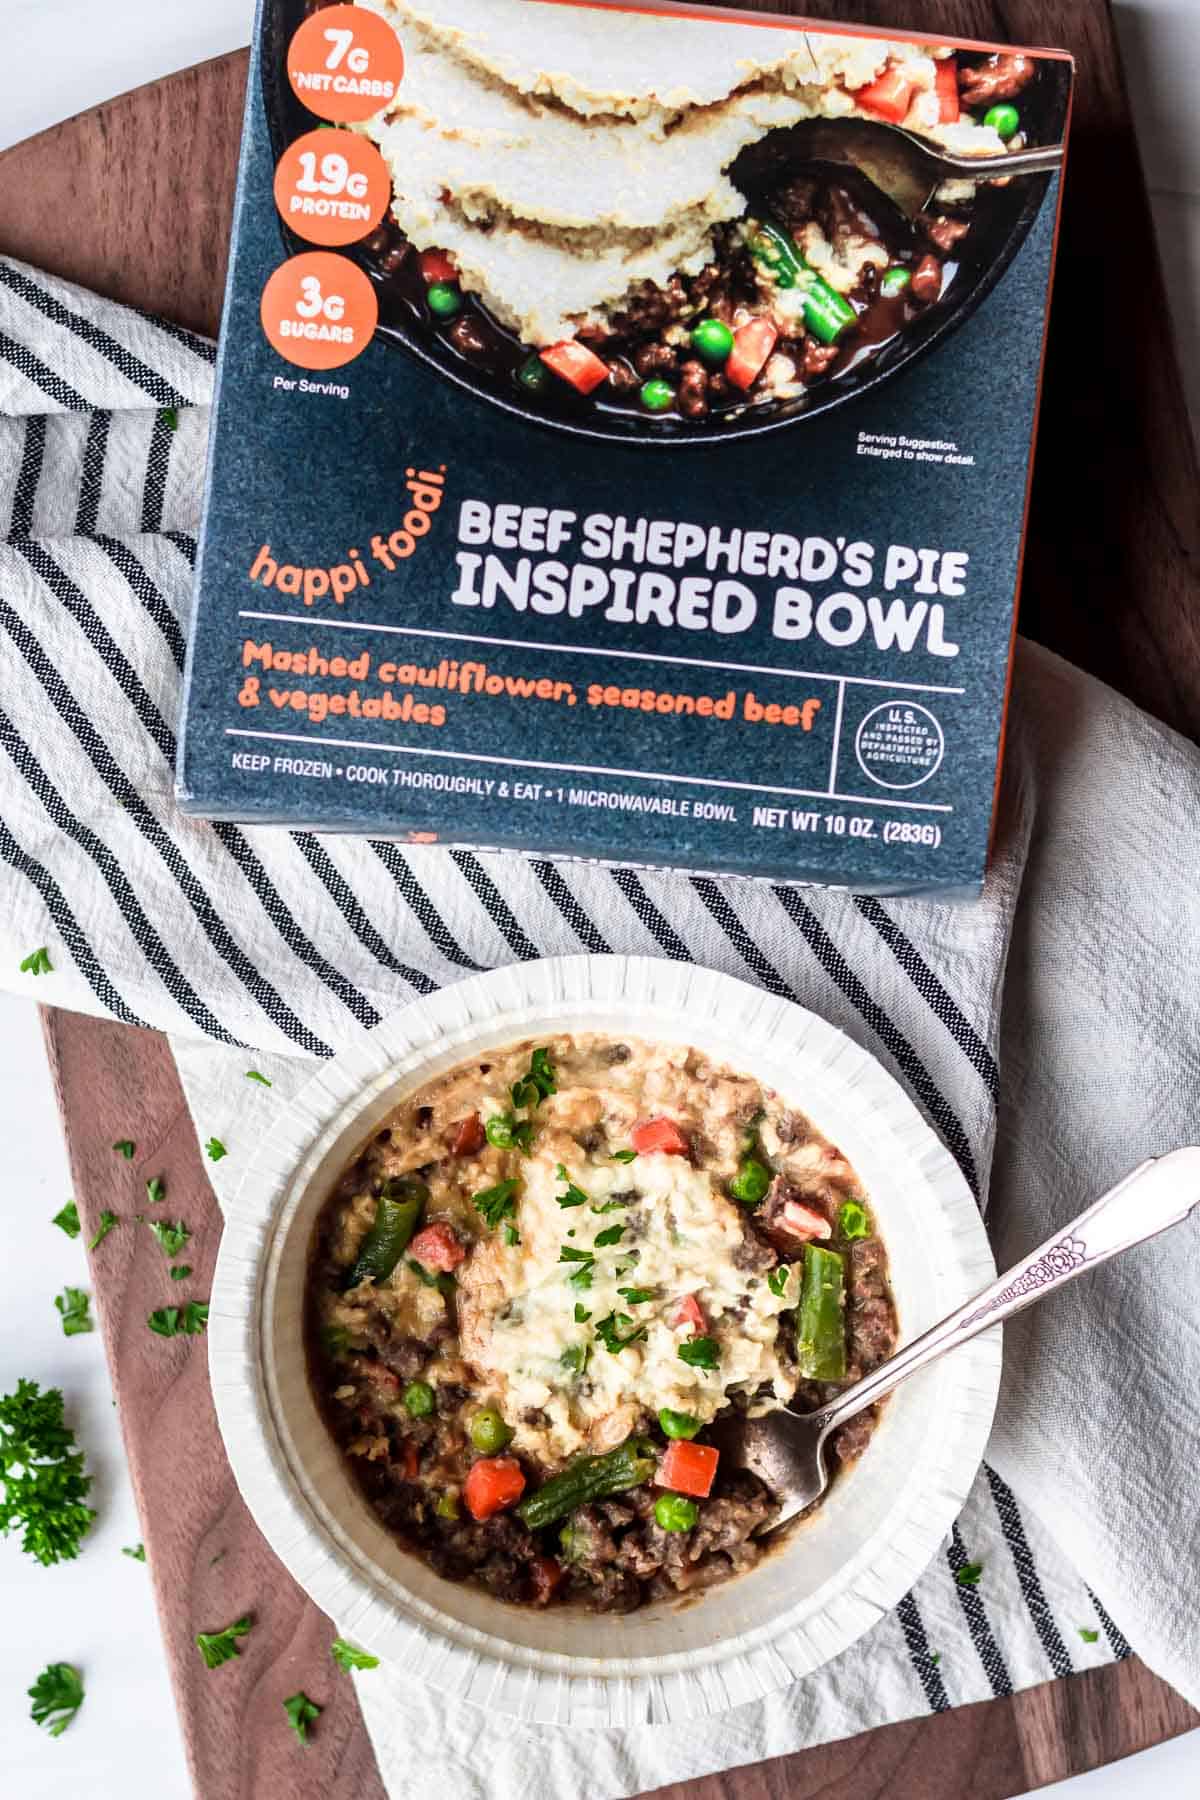 Happi Foodi Beef Shepard's Pie Inspired Bowl box and meal on a wood background with a striped napkin, fork, and parsley